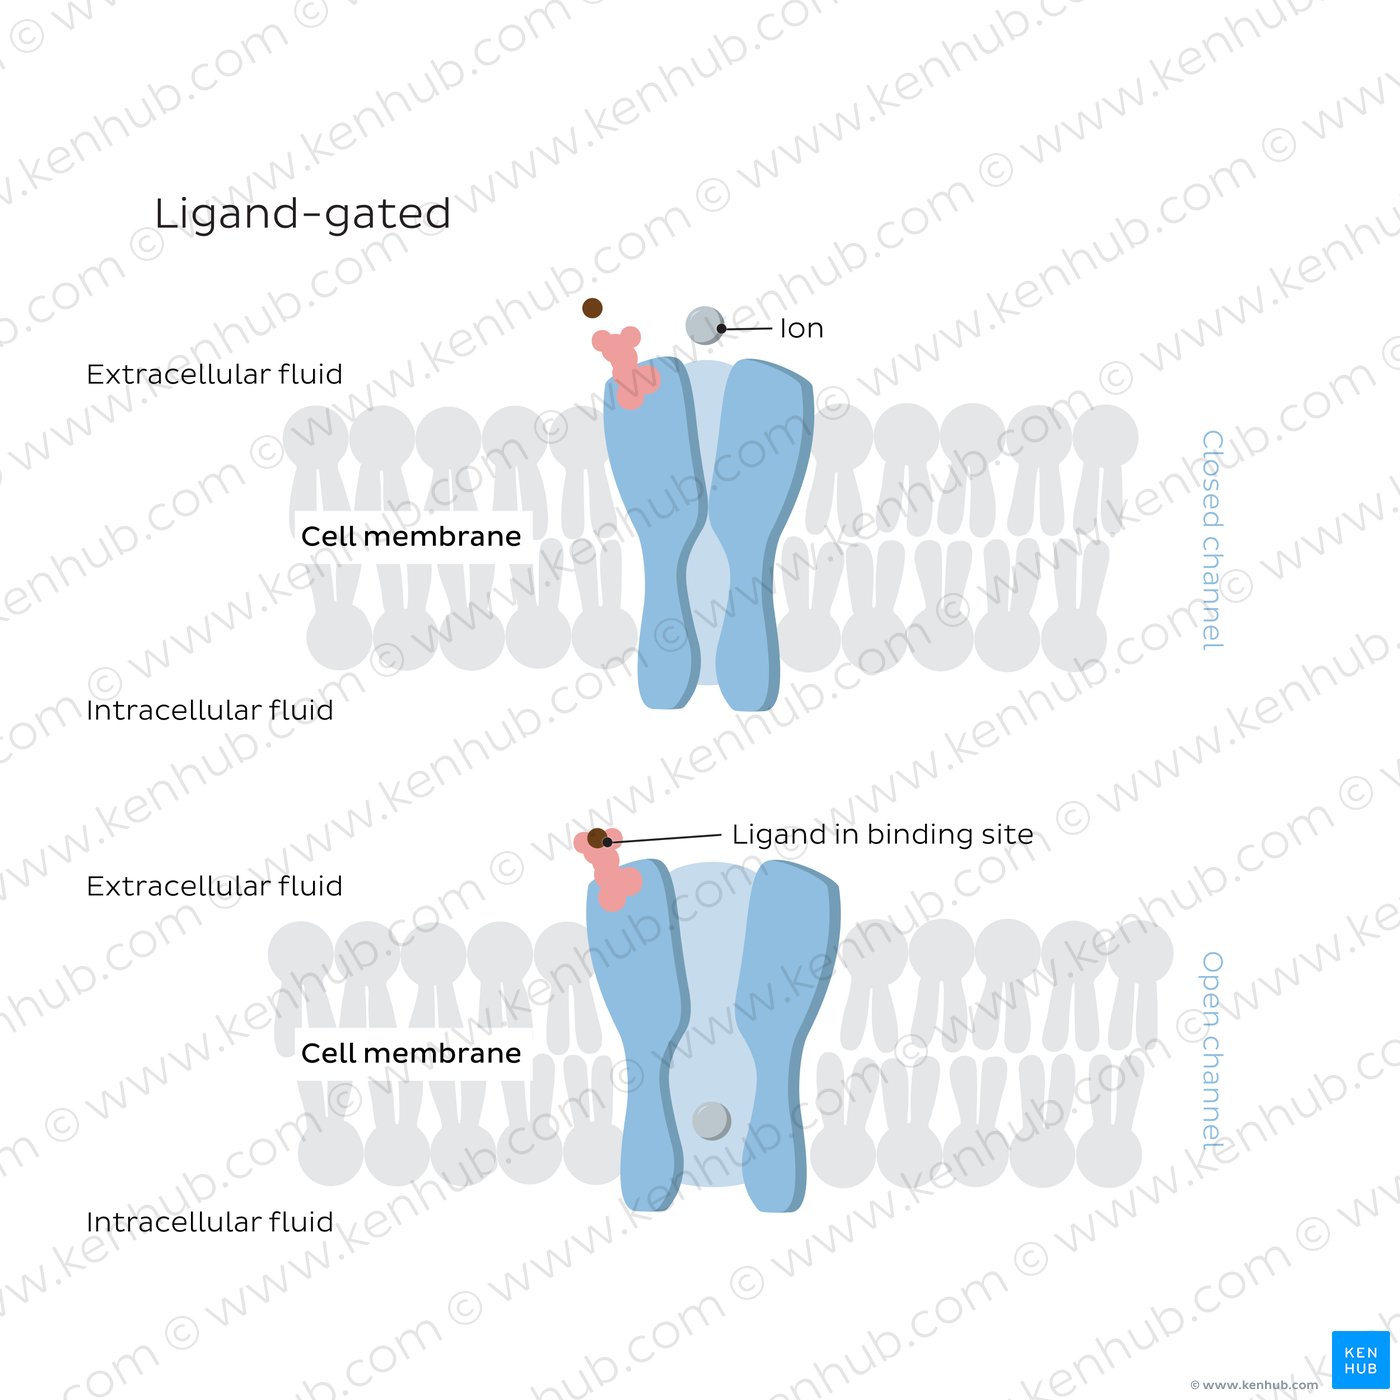 Ligand-gated ion channels